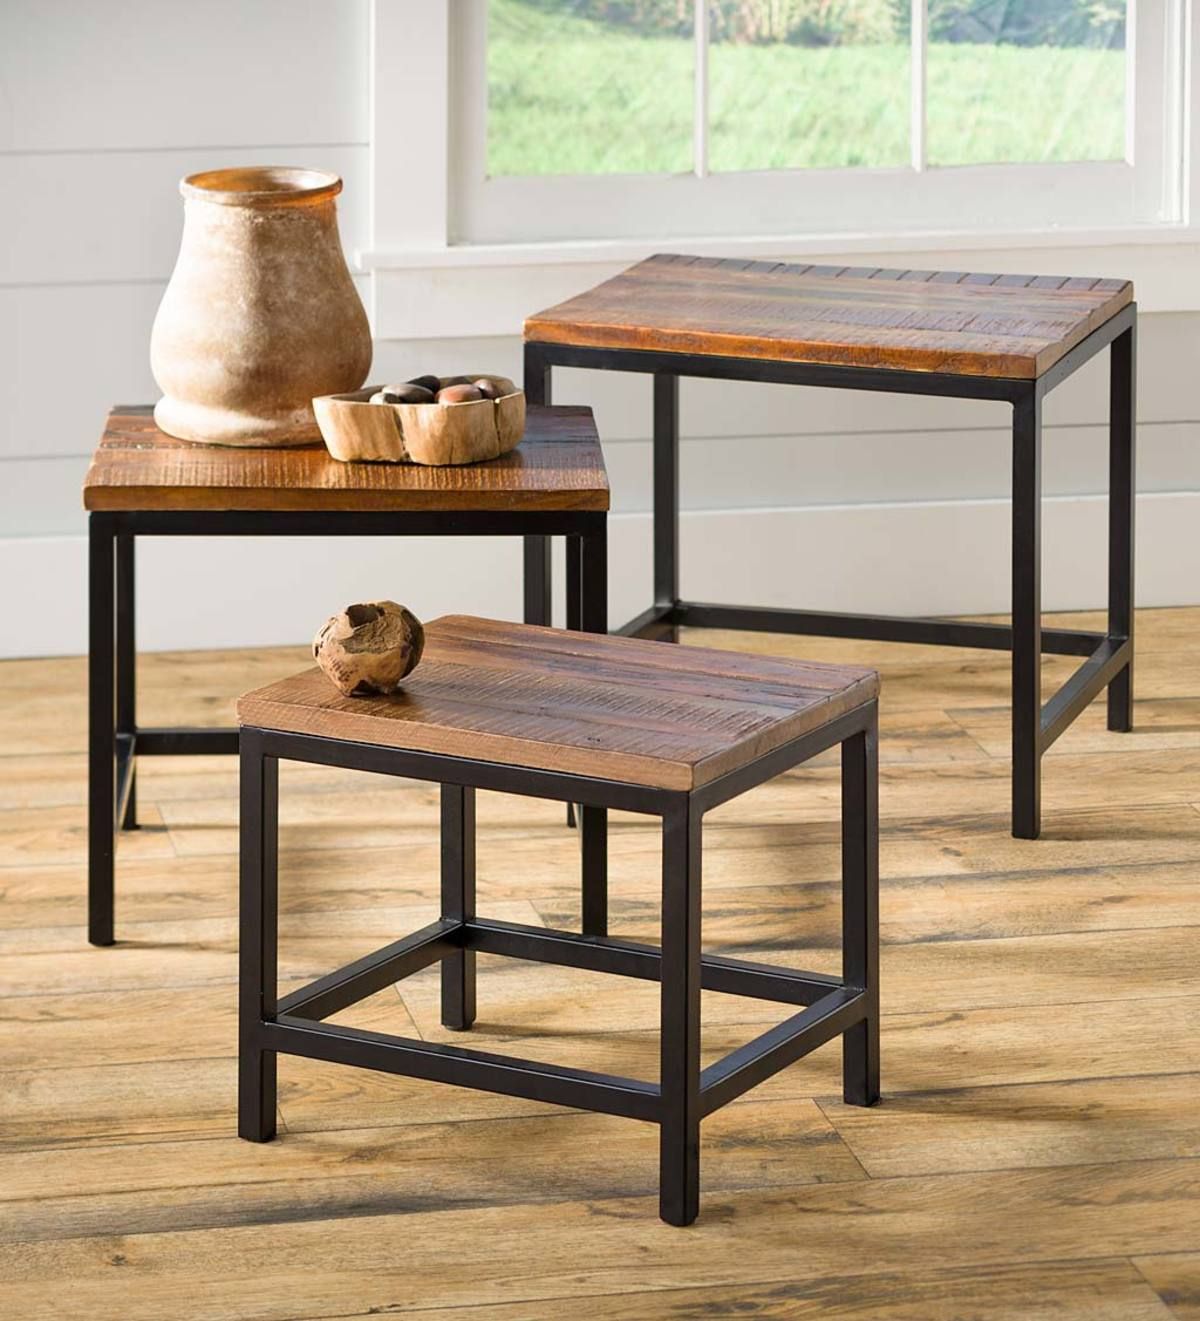 Allegheny Reclaimed Wood Nesting Tables, Set Of 3 | Plow & Hearth Pertaining To Coffee Tables Of 3 Nesting Tables (Gallery 10 of 20)